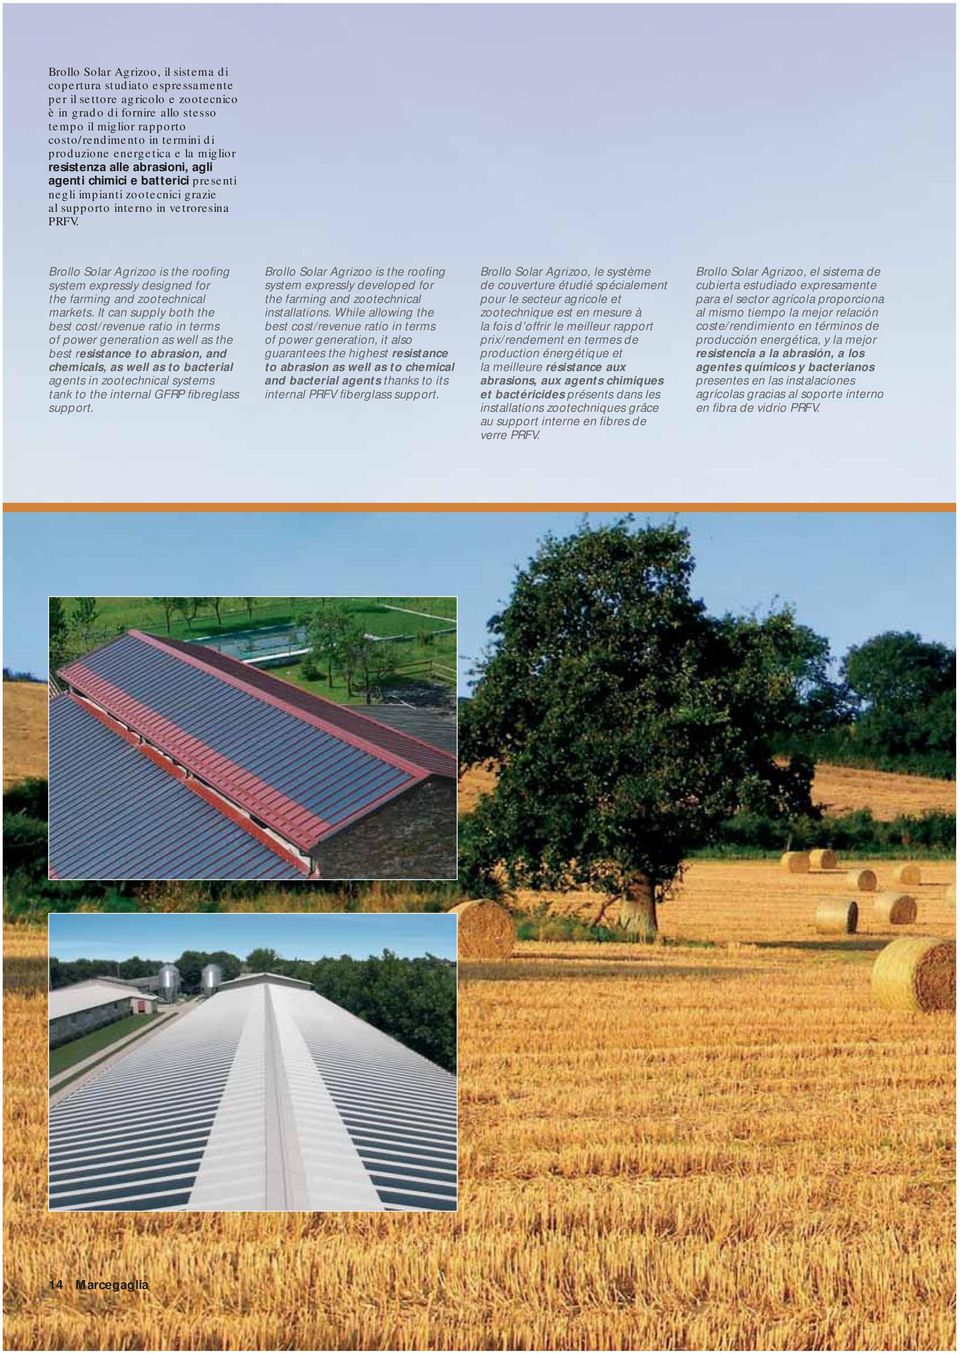 Brollo Solar Agrizoo is the roofing system expressly designed for the farming and zootechnical markets.